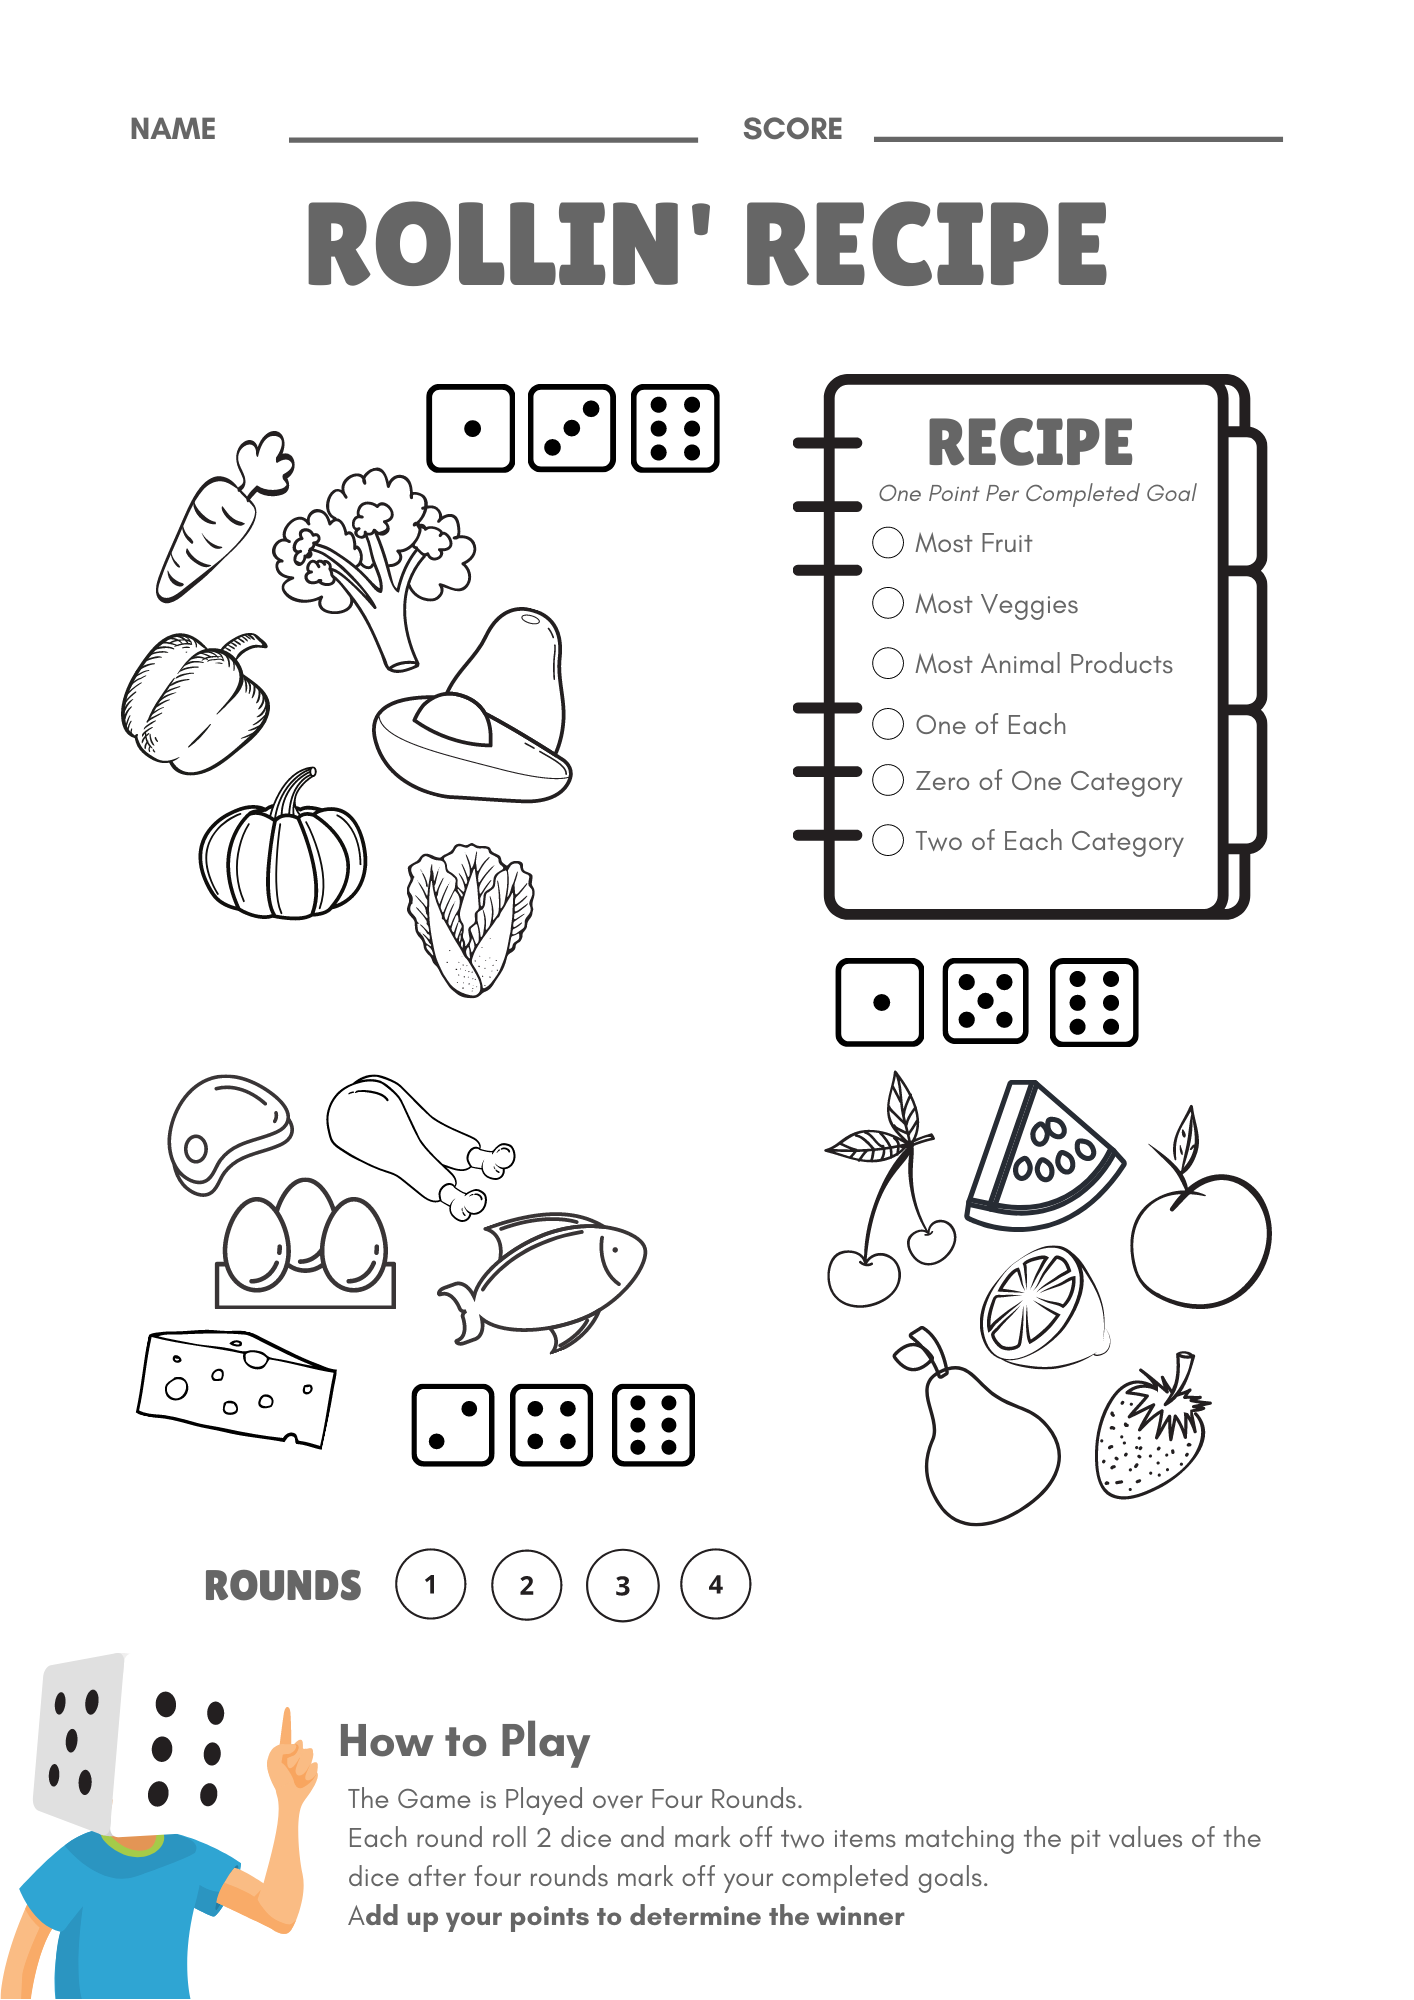 Rollin' Recipe Free Printable Dice Game for Families – Help My Kids Are  Bored